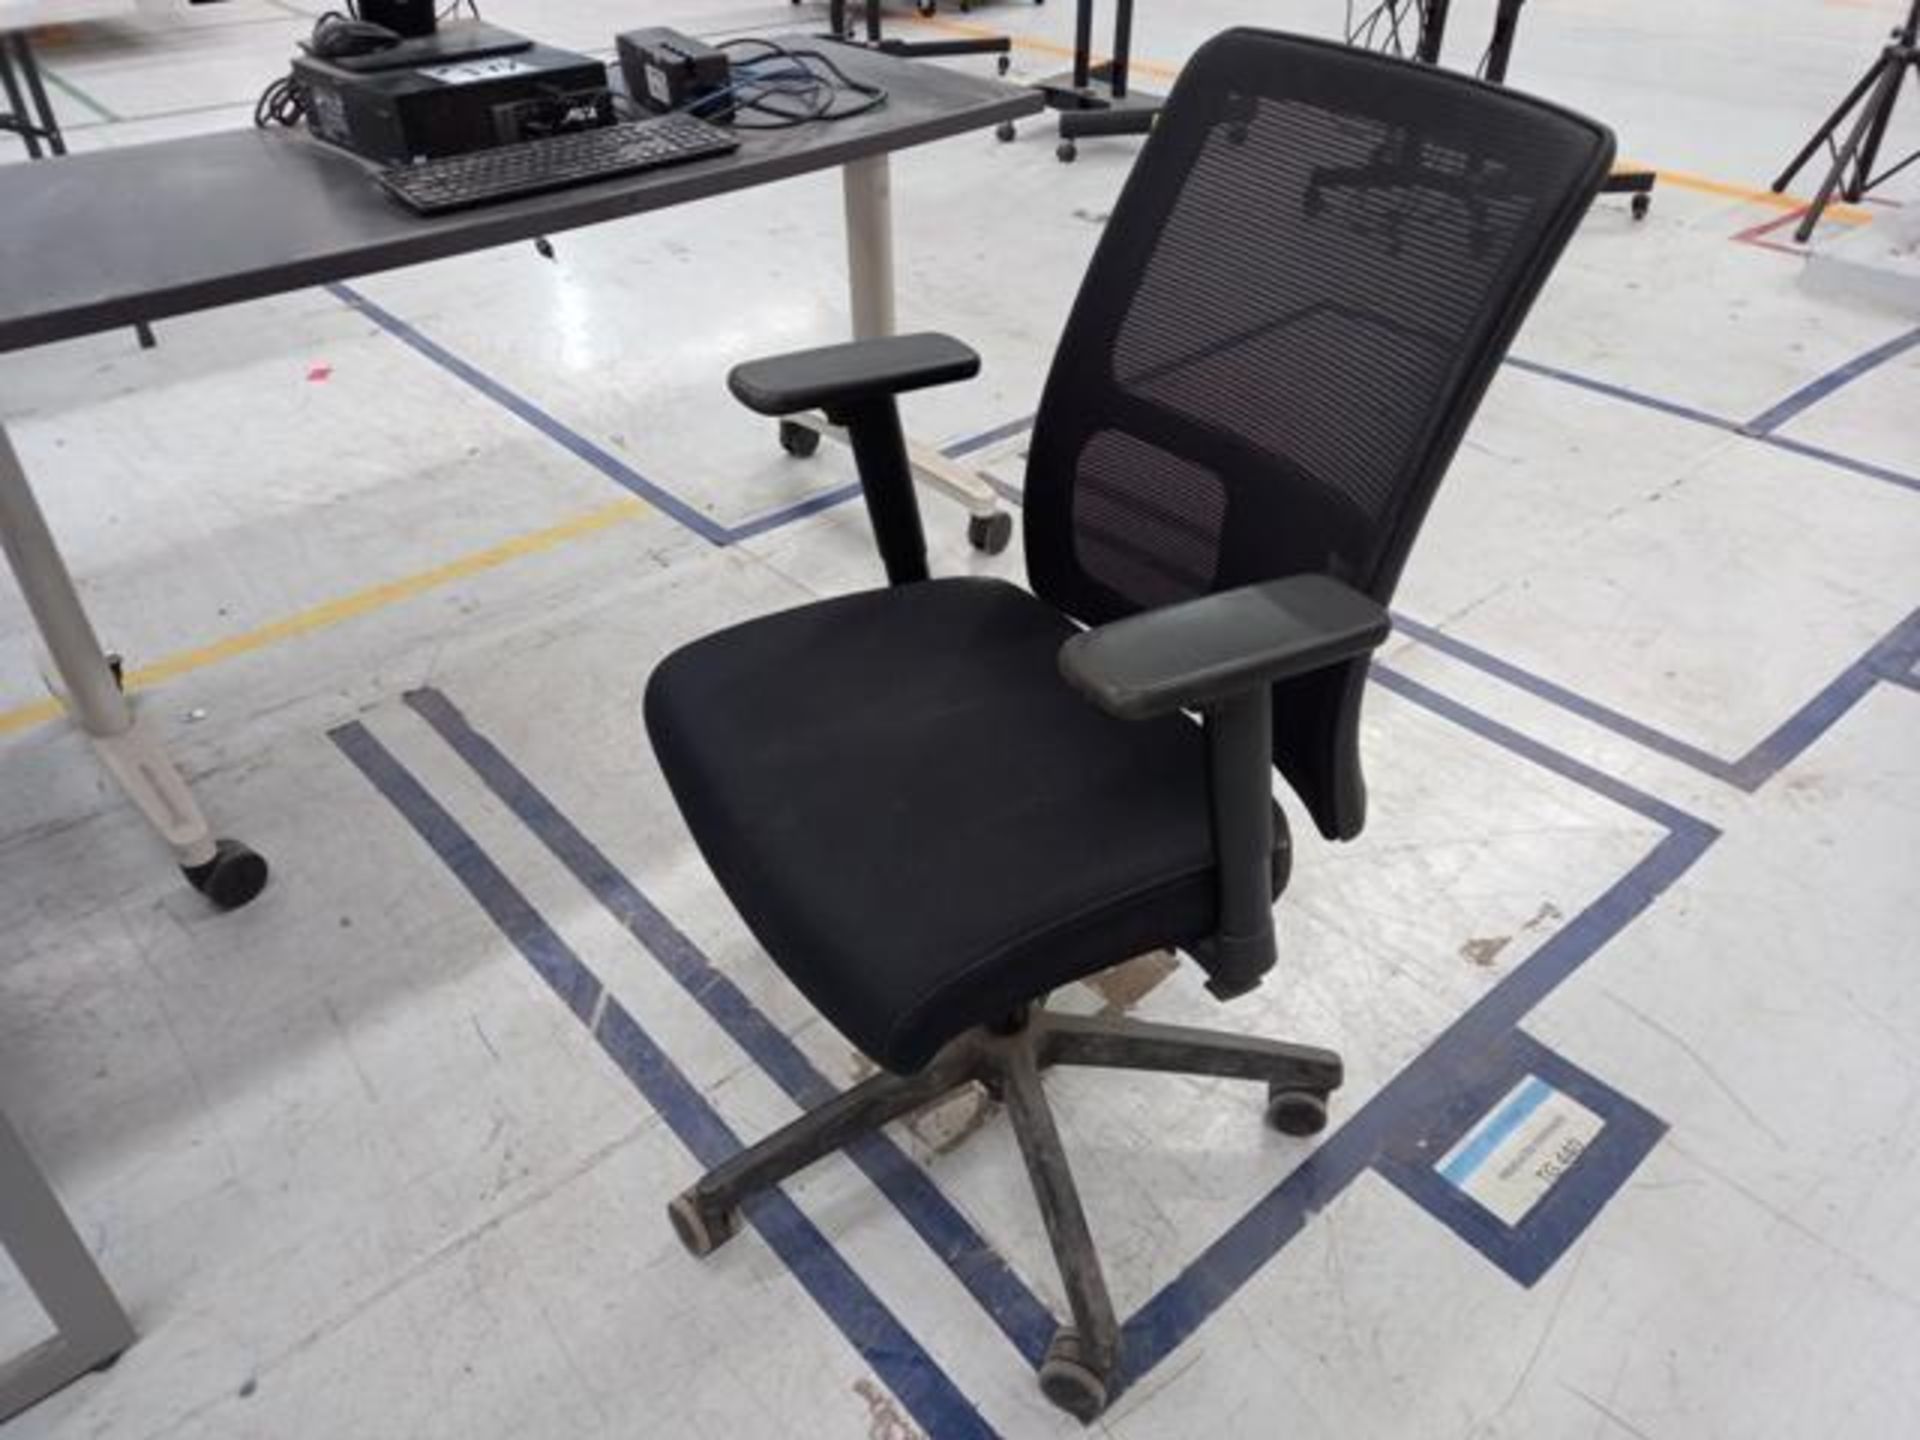 LOT: (66) Of Furniture and Computing Equipment Consisting of: Computers, Printers, Desks, Chairs, Dr - Image 4 of 38